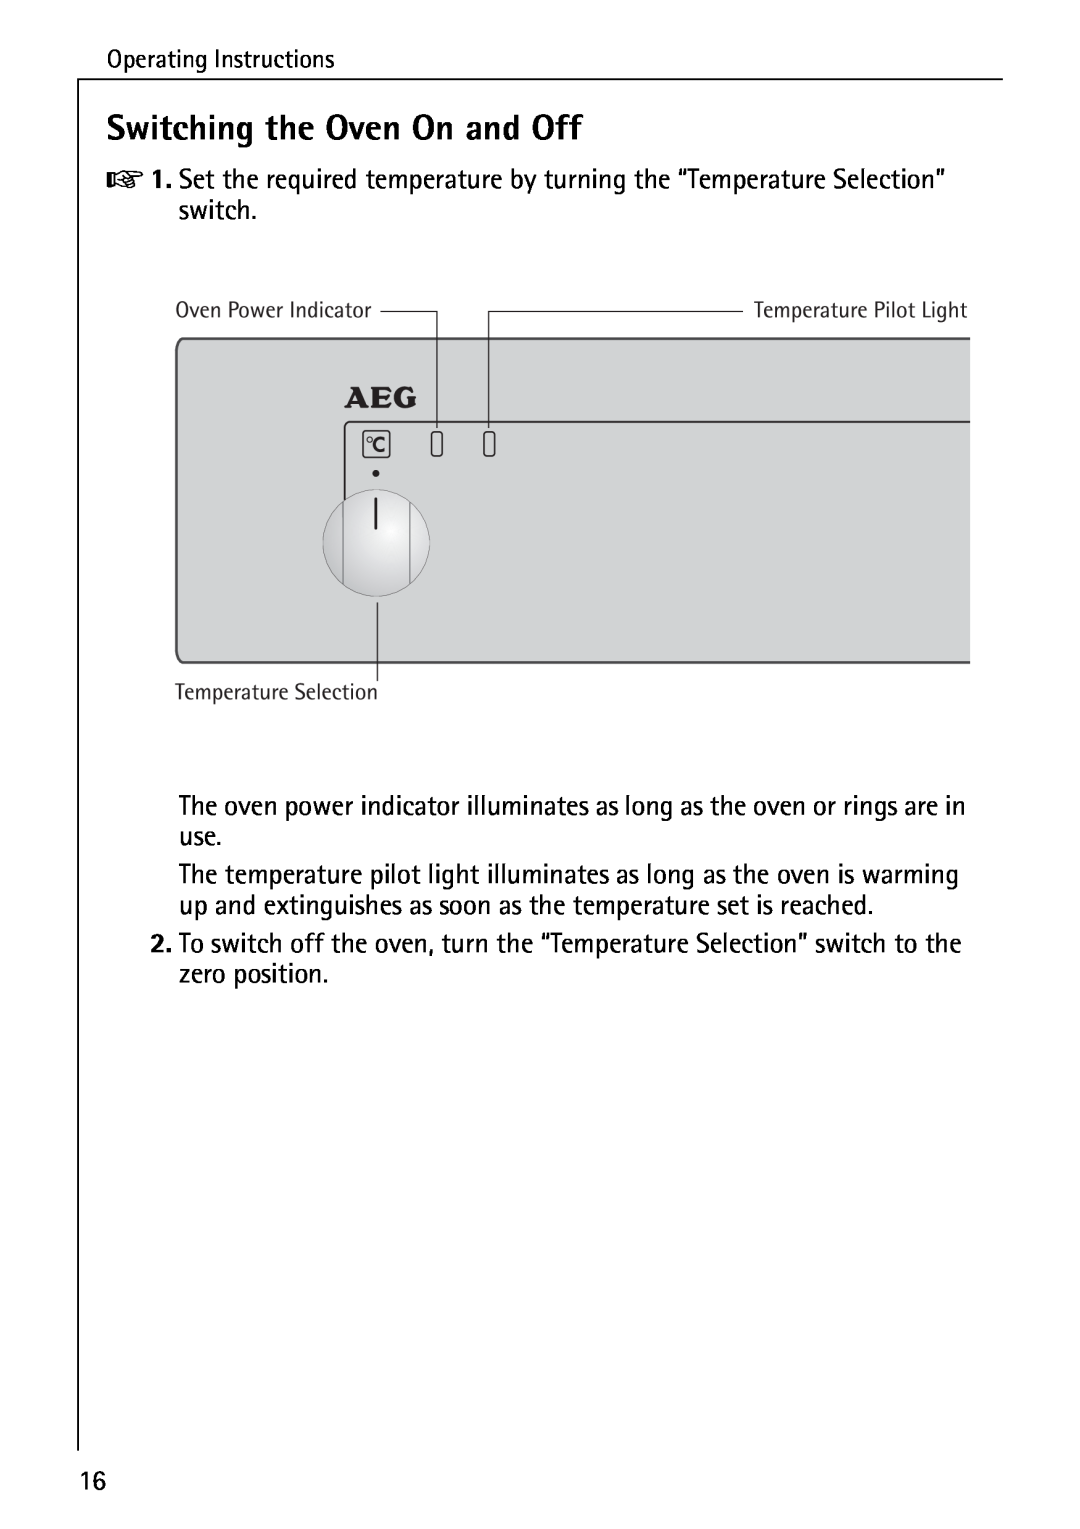 AEG 2003 F operating instructions Switching the Oven On and Off 